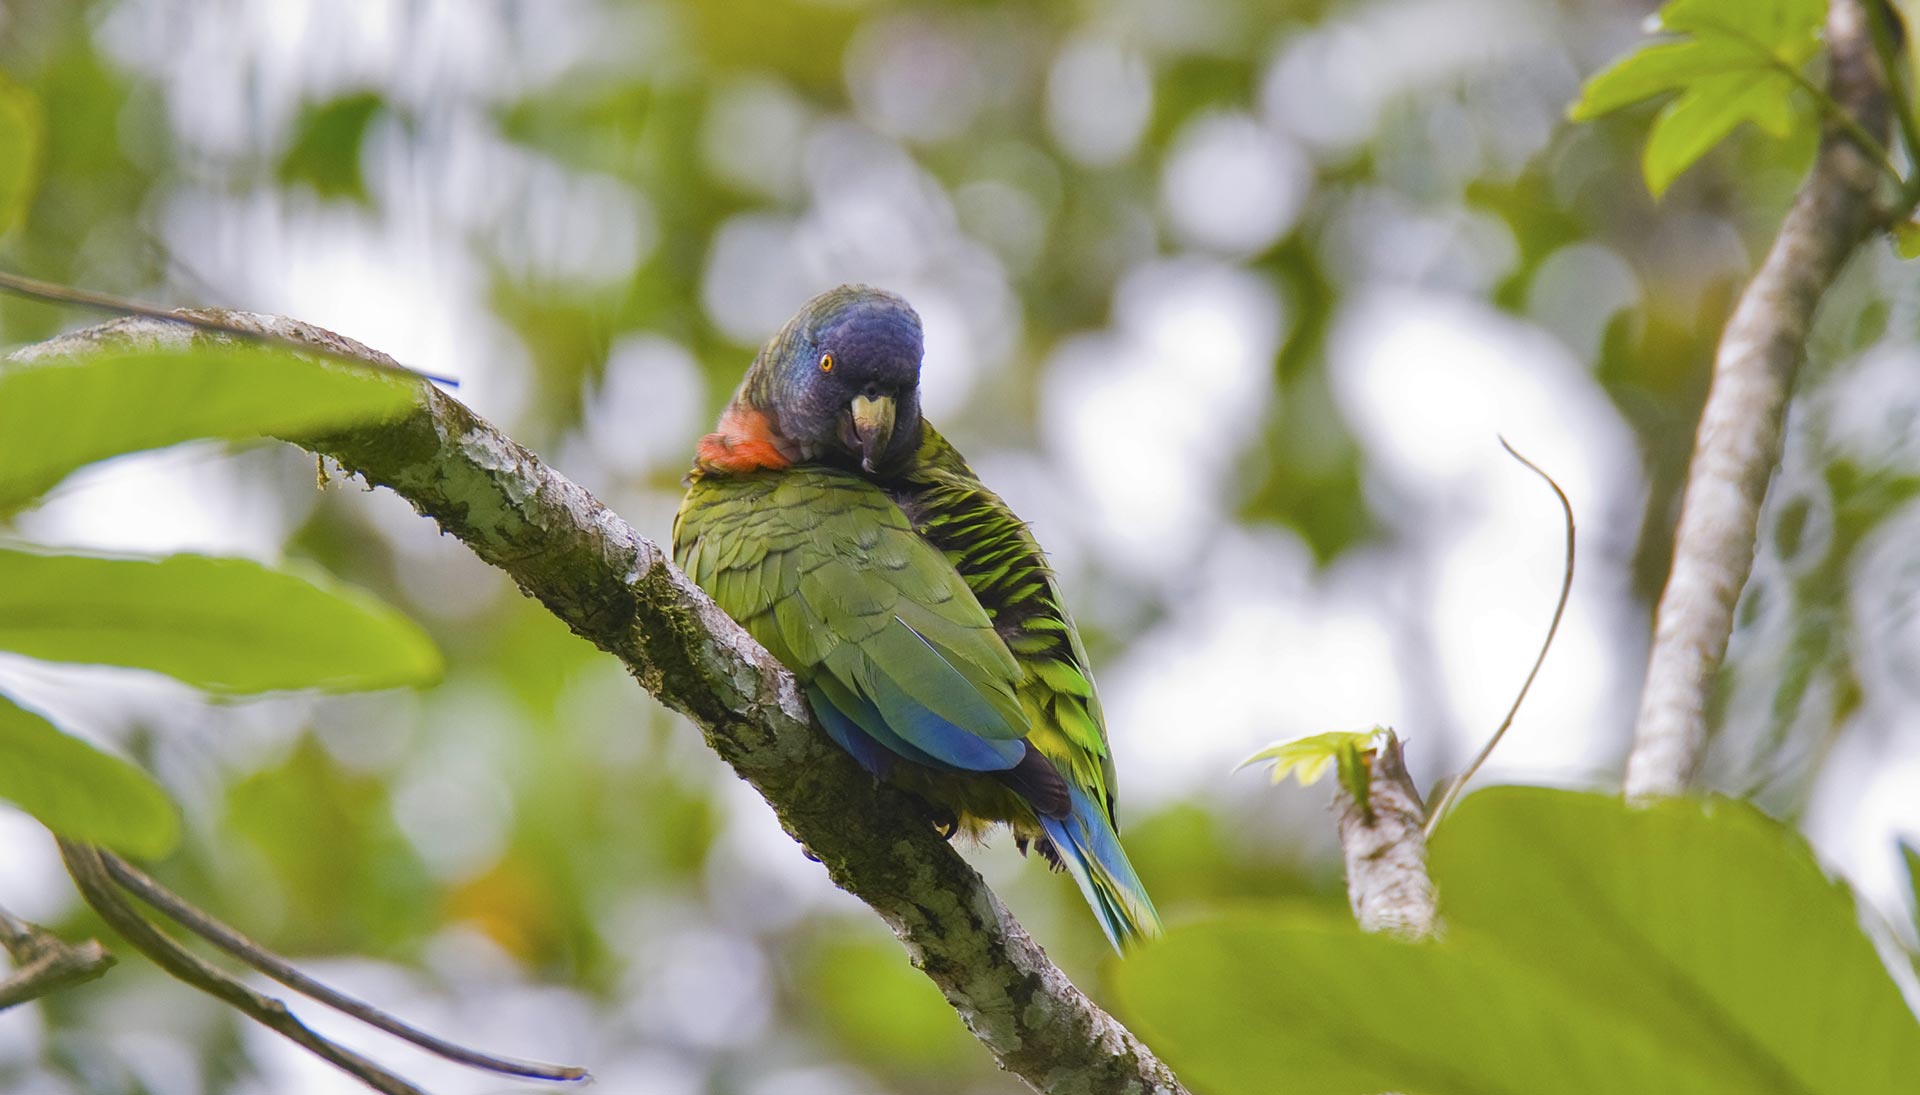 See St. Lucia's National Bird - The Jacquot